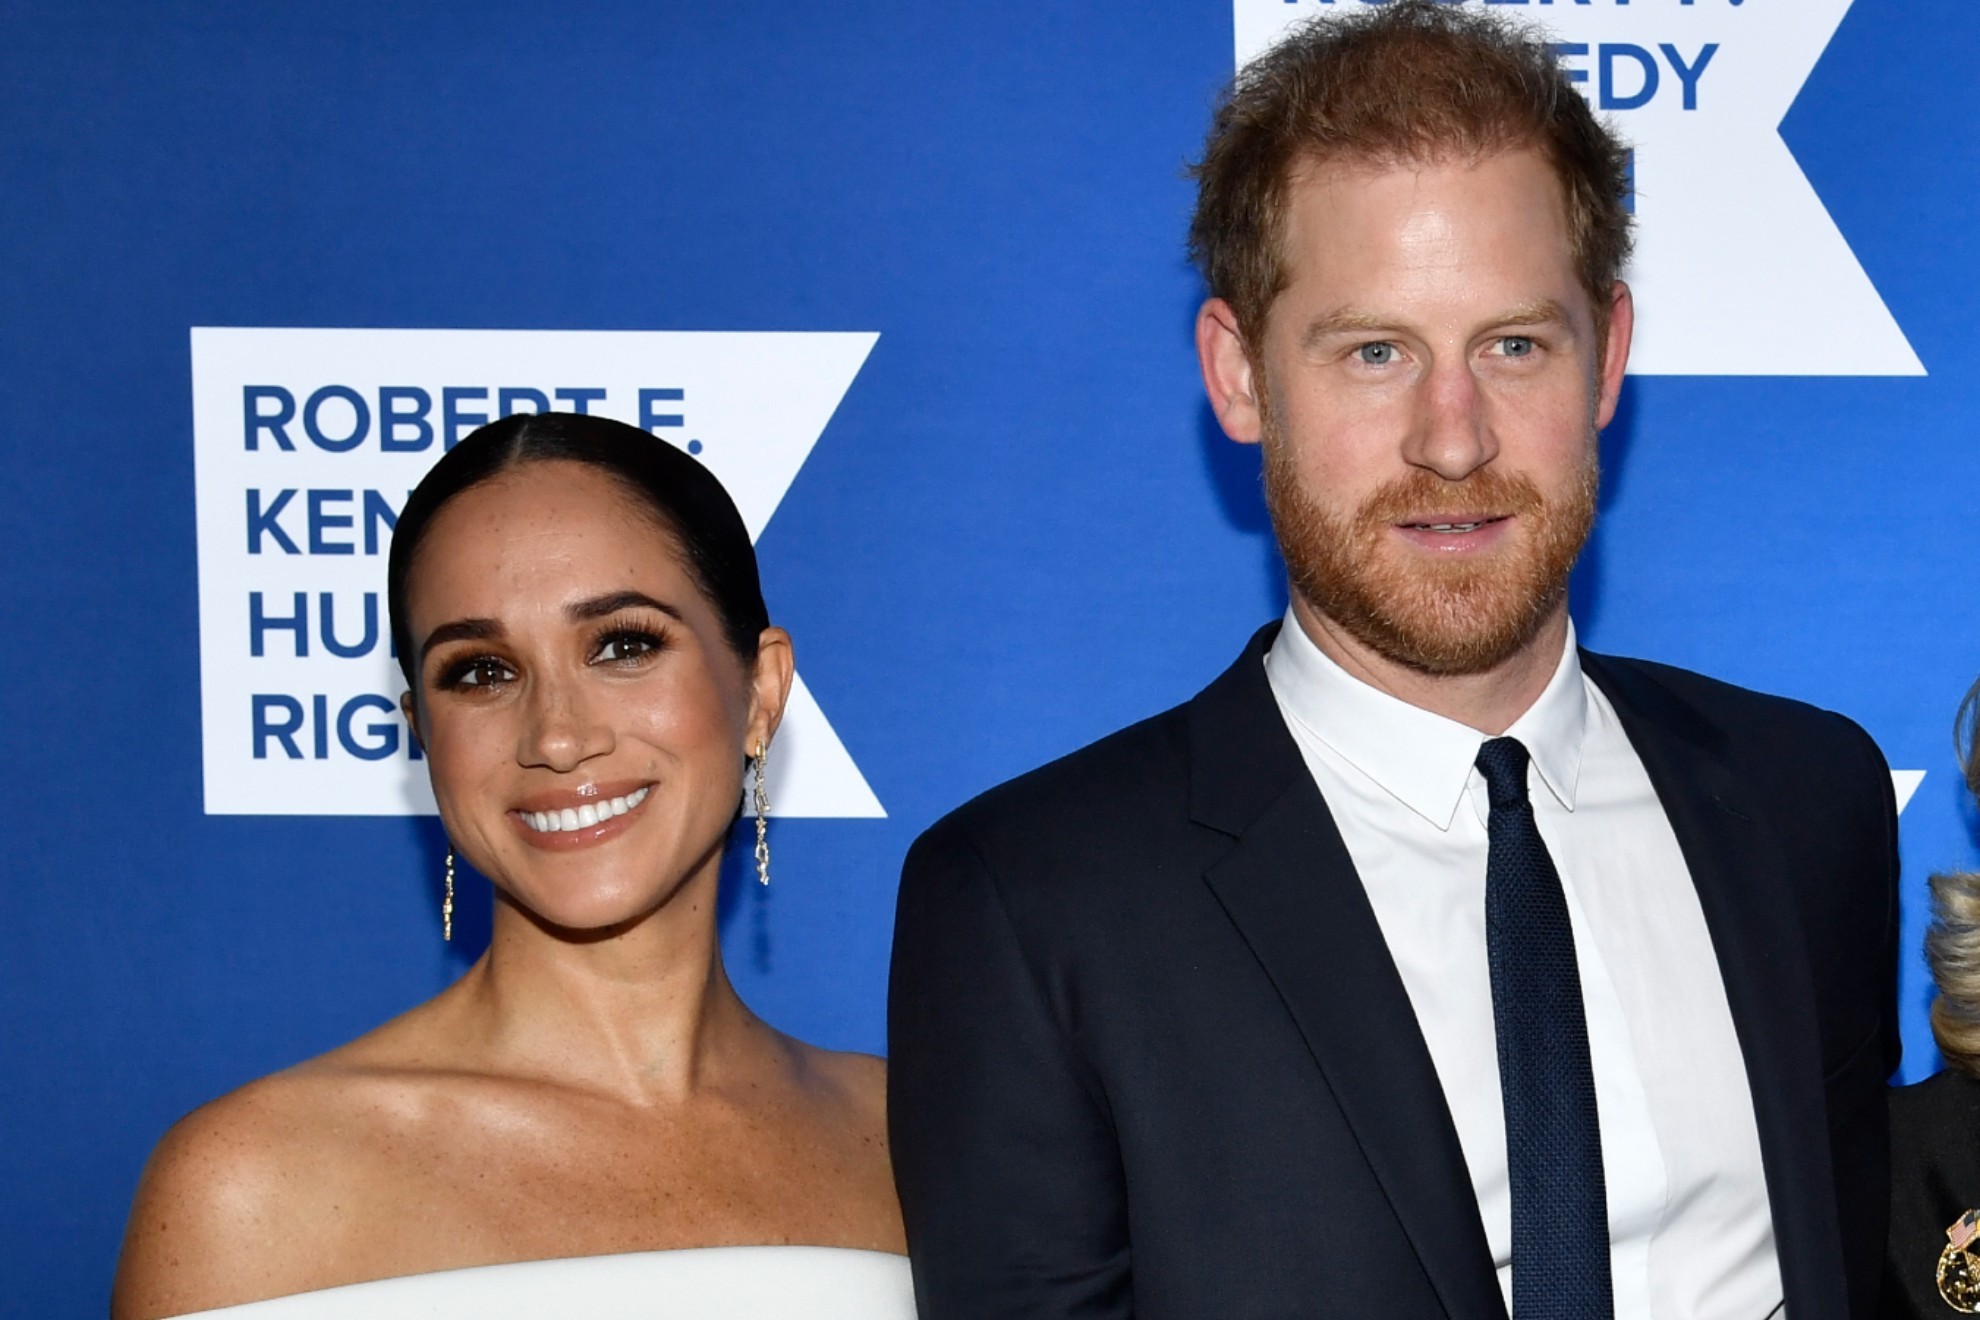 The Duke and Duchess of Sussex, Prince Harry and Meghan Markle.